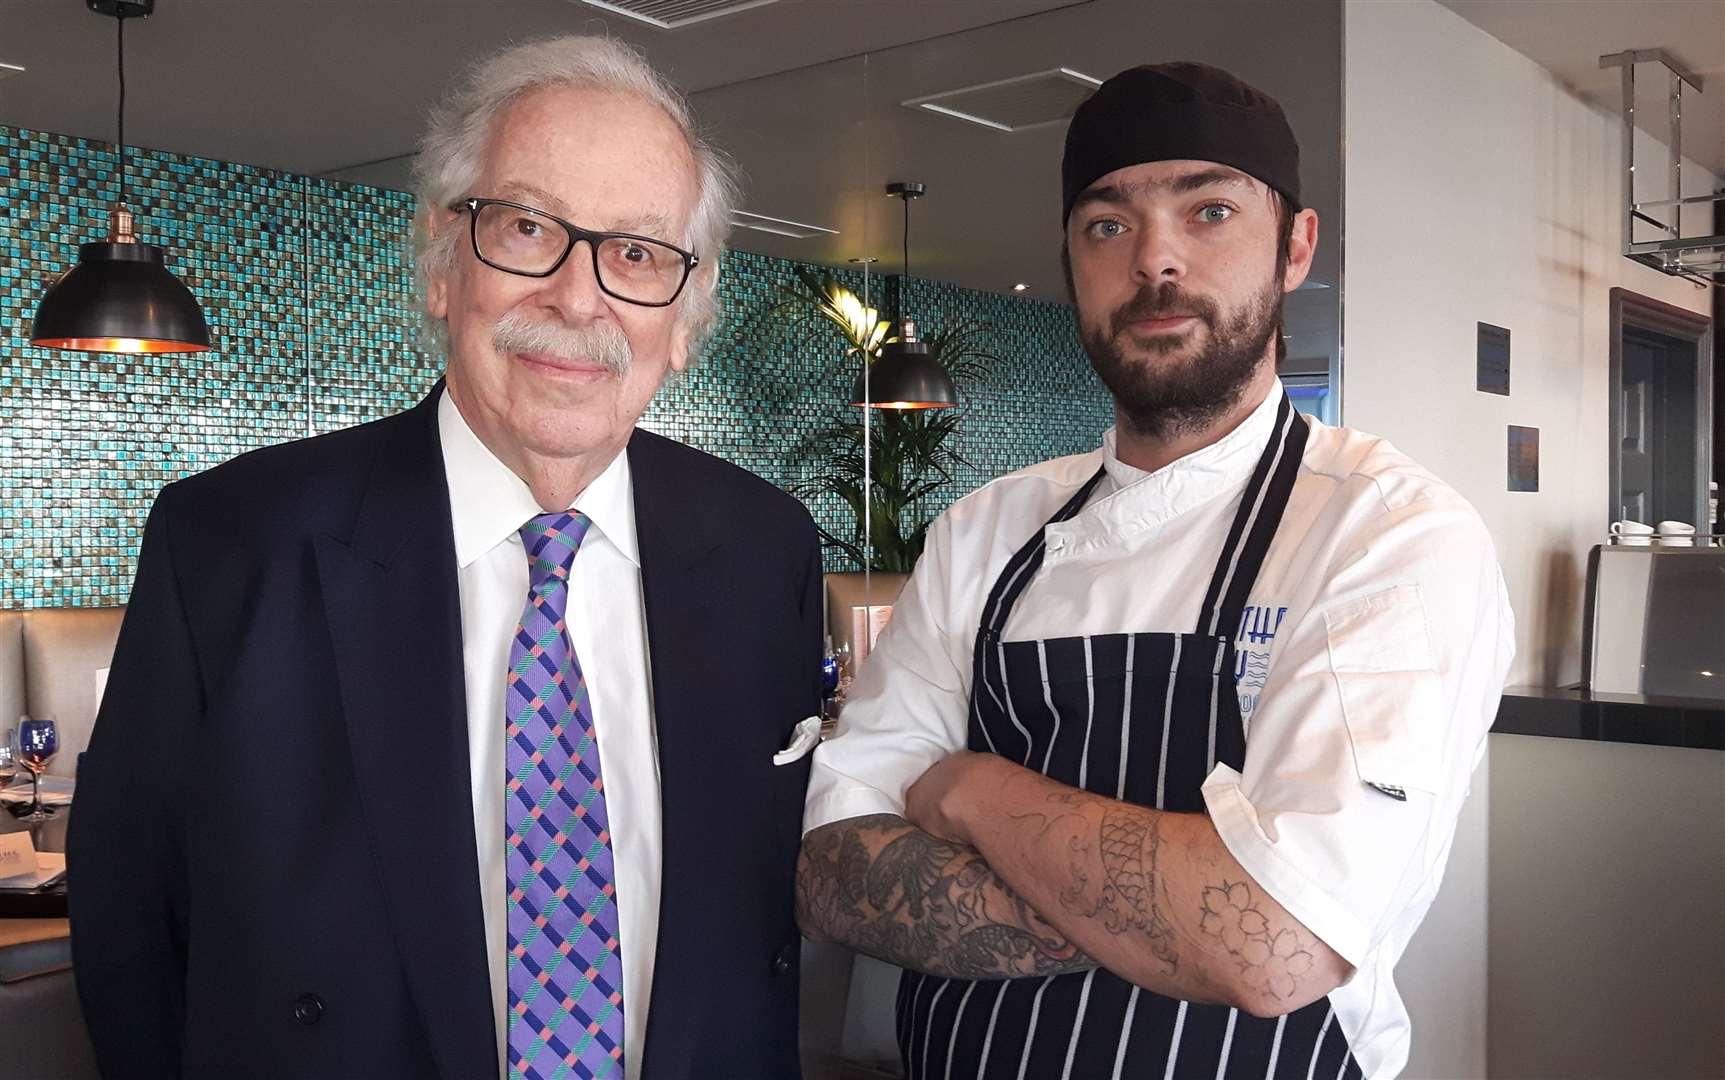 Turrloo Parrett opened the third Hythe Bay Seafood Restaurant and Bar in Deal in 2016, pictured with chef Jamie Colvin